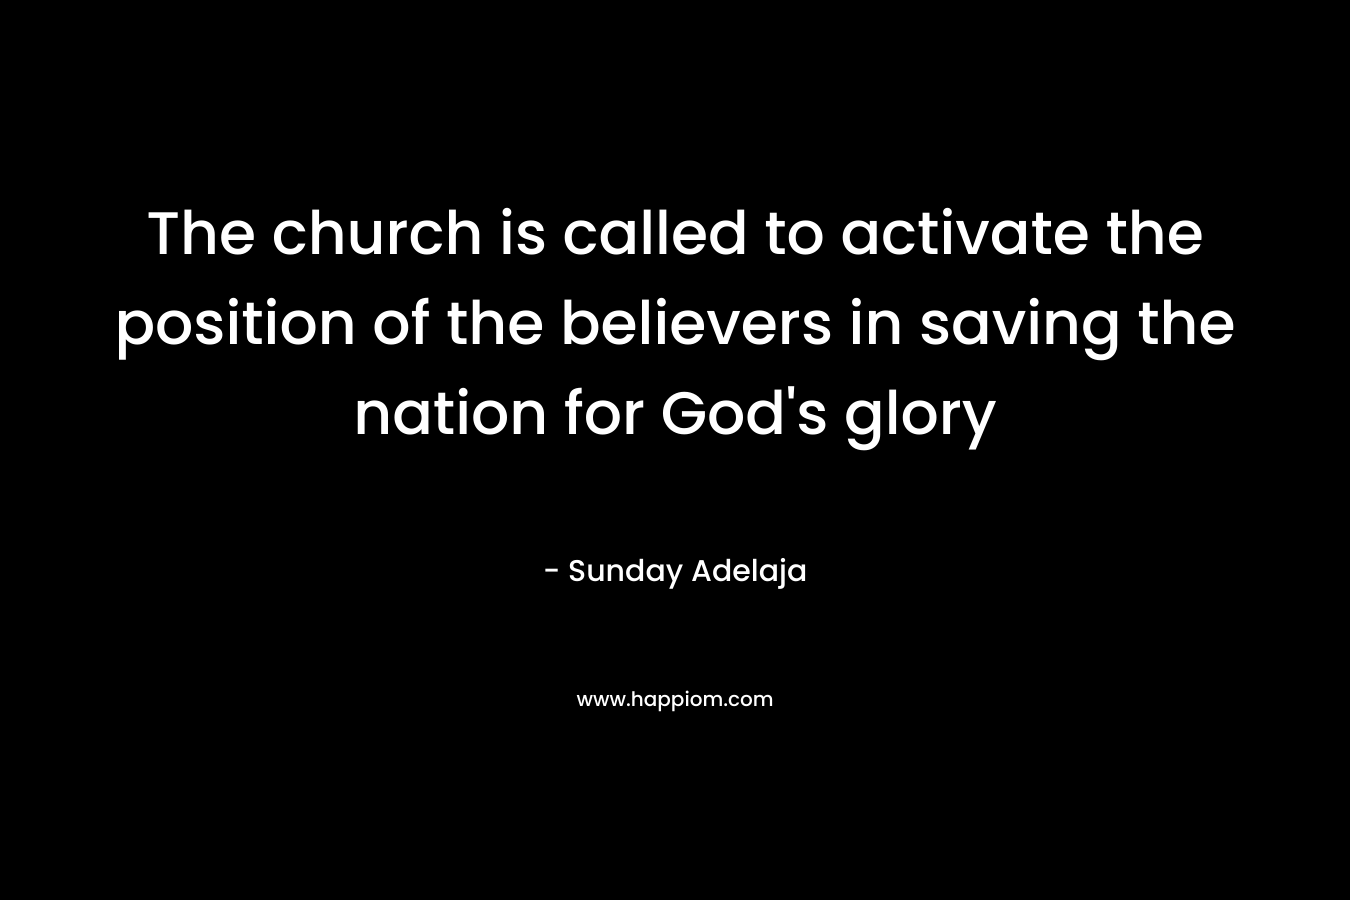 The church is called to activate the position of the believers in saving the nation for God’s glory – Sunday Adelaja